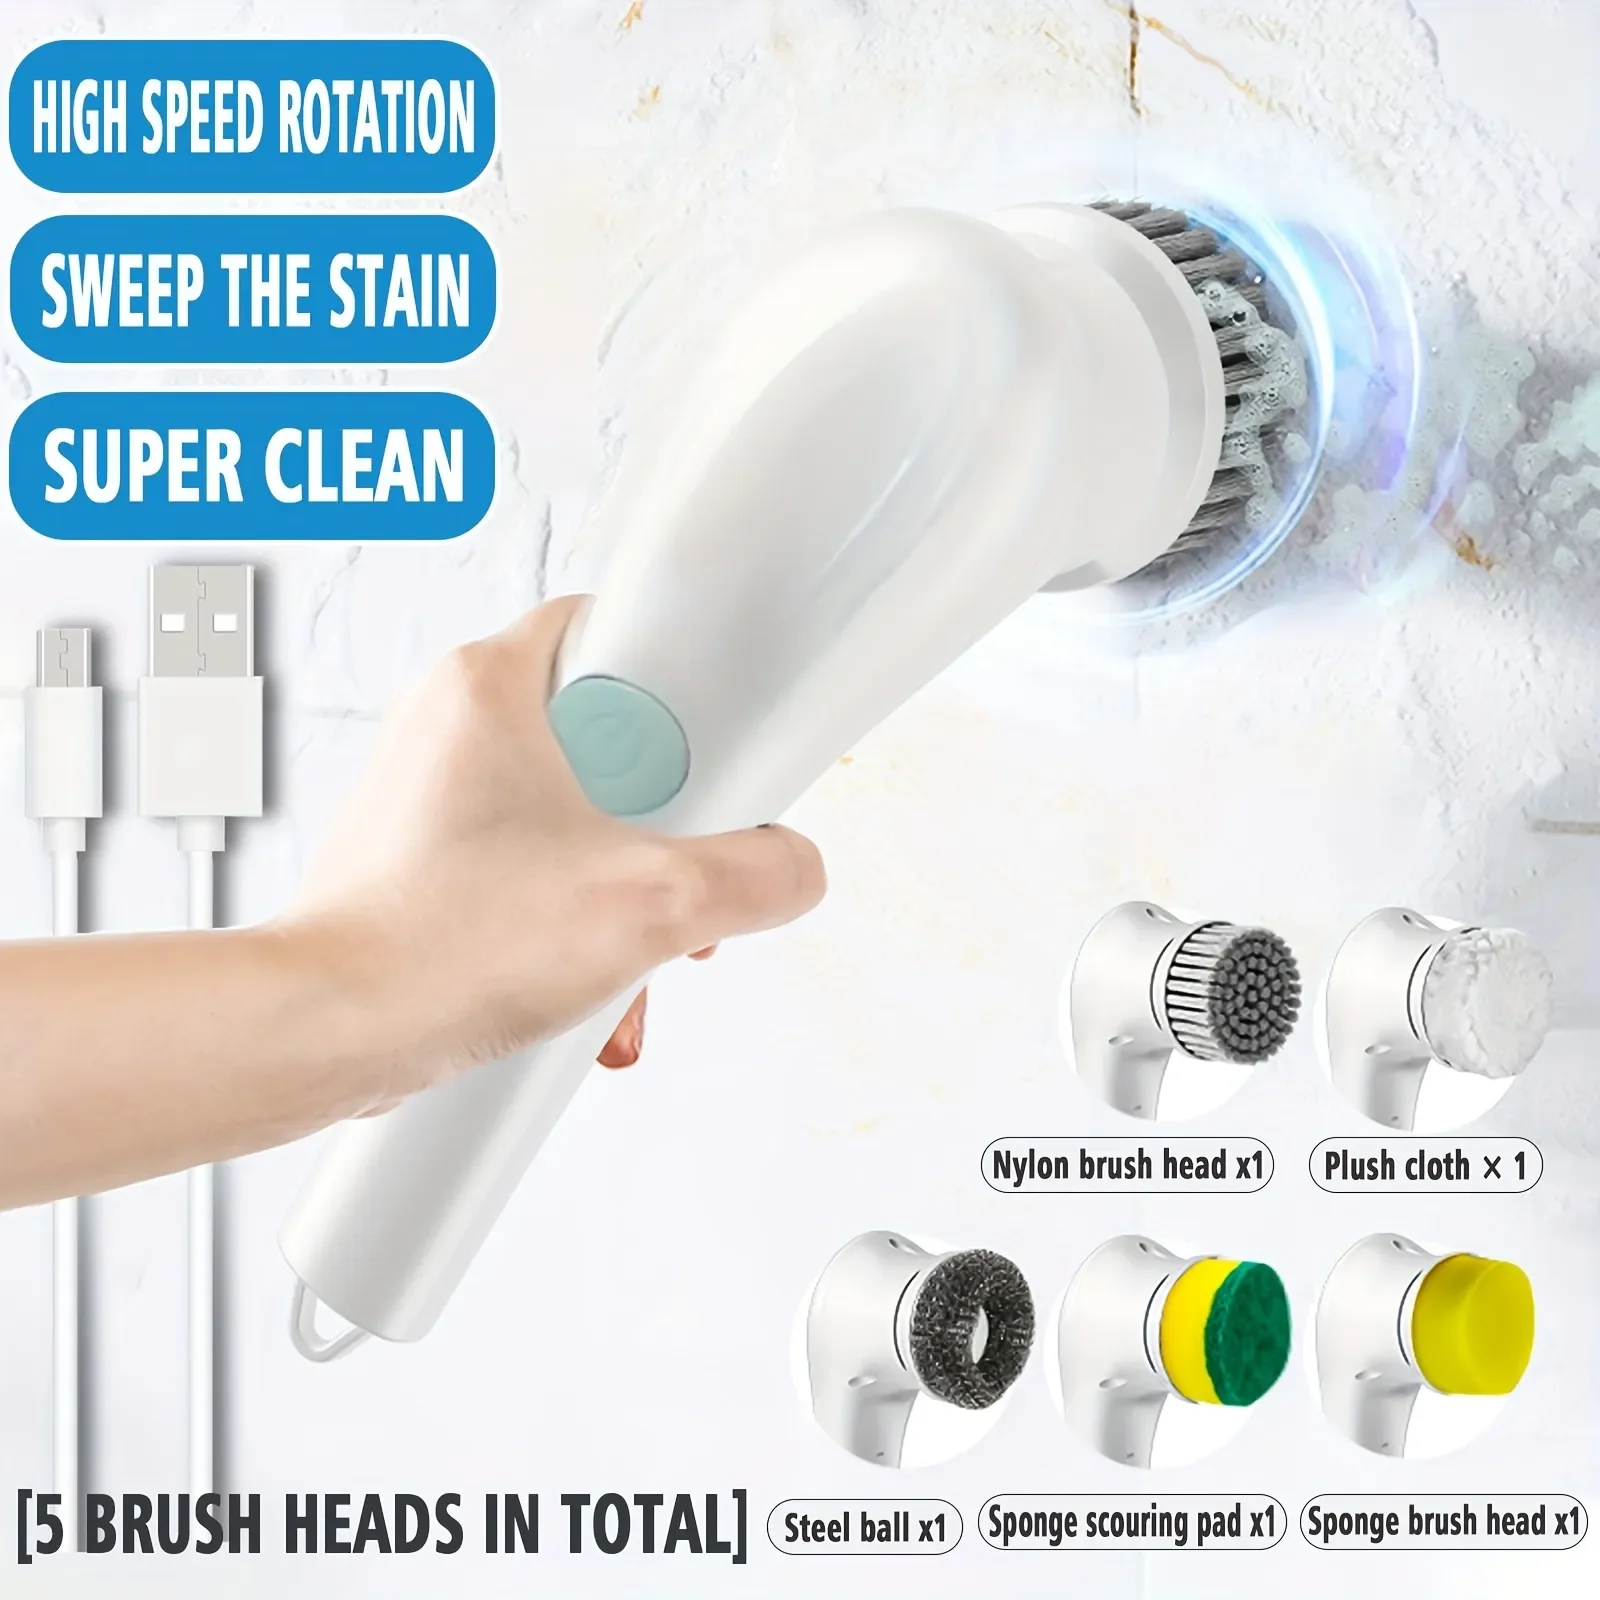 5-in-1Multifunctional Electric Cleaning Brush usb charging Bathroom Wash Brush Kitchen Cleaning Tool Dishwashing Brush 7 in 1 electric cleaning brush window wall cleaner electric turbo scrub brush rotating scrubber kitchen bathroom cleaning tools